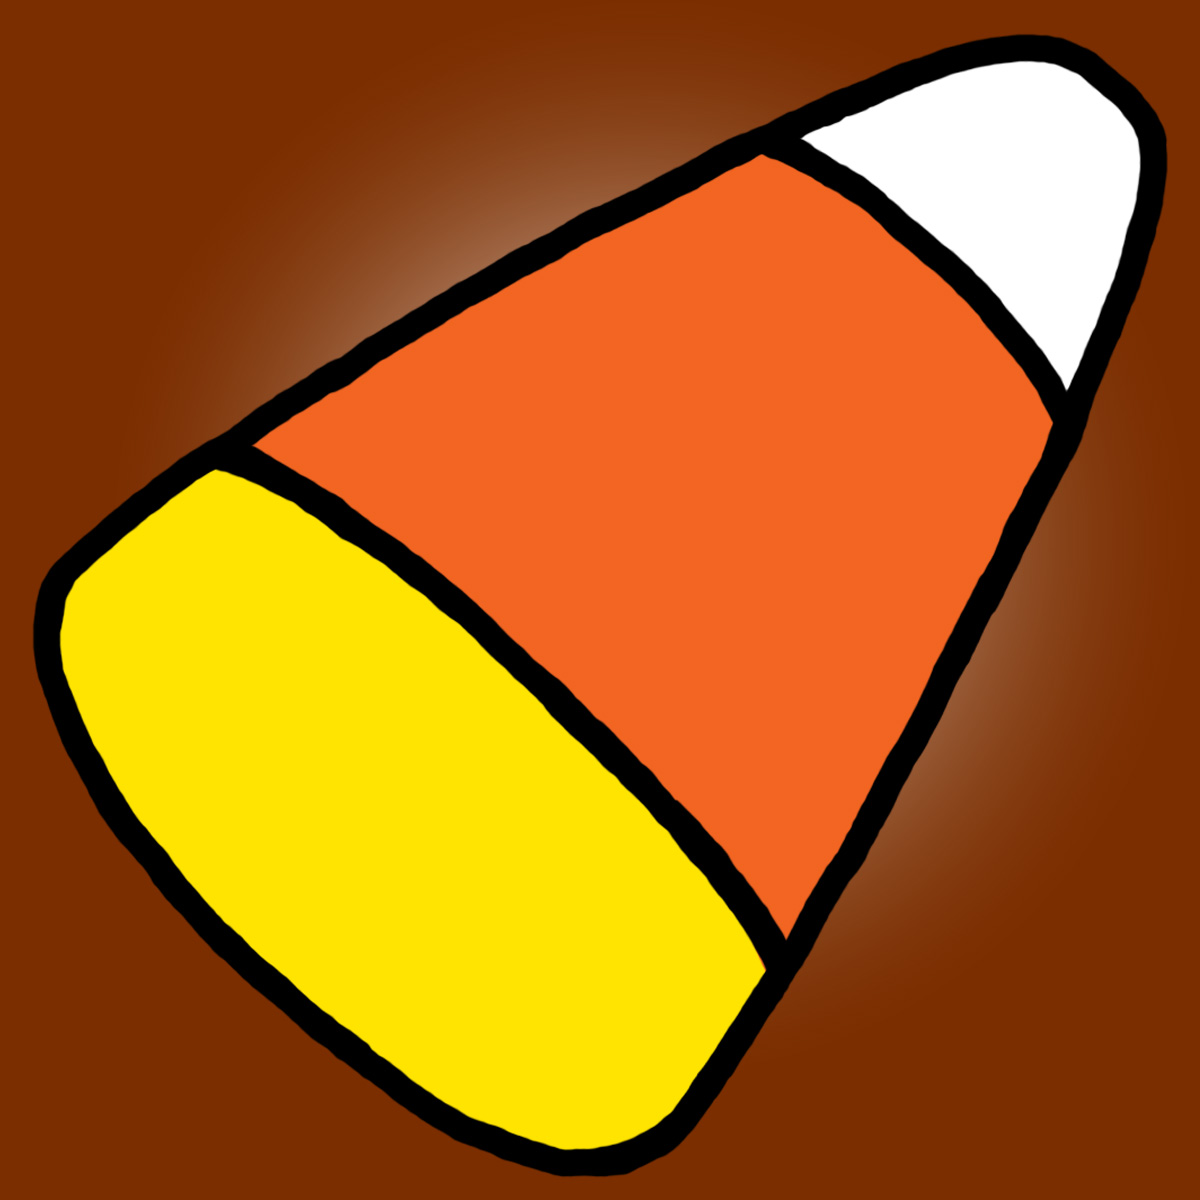 Candy corn coloring sheet clipart 2 wikiclipart.